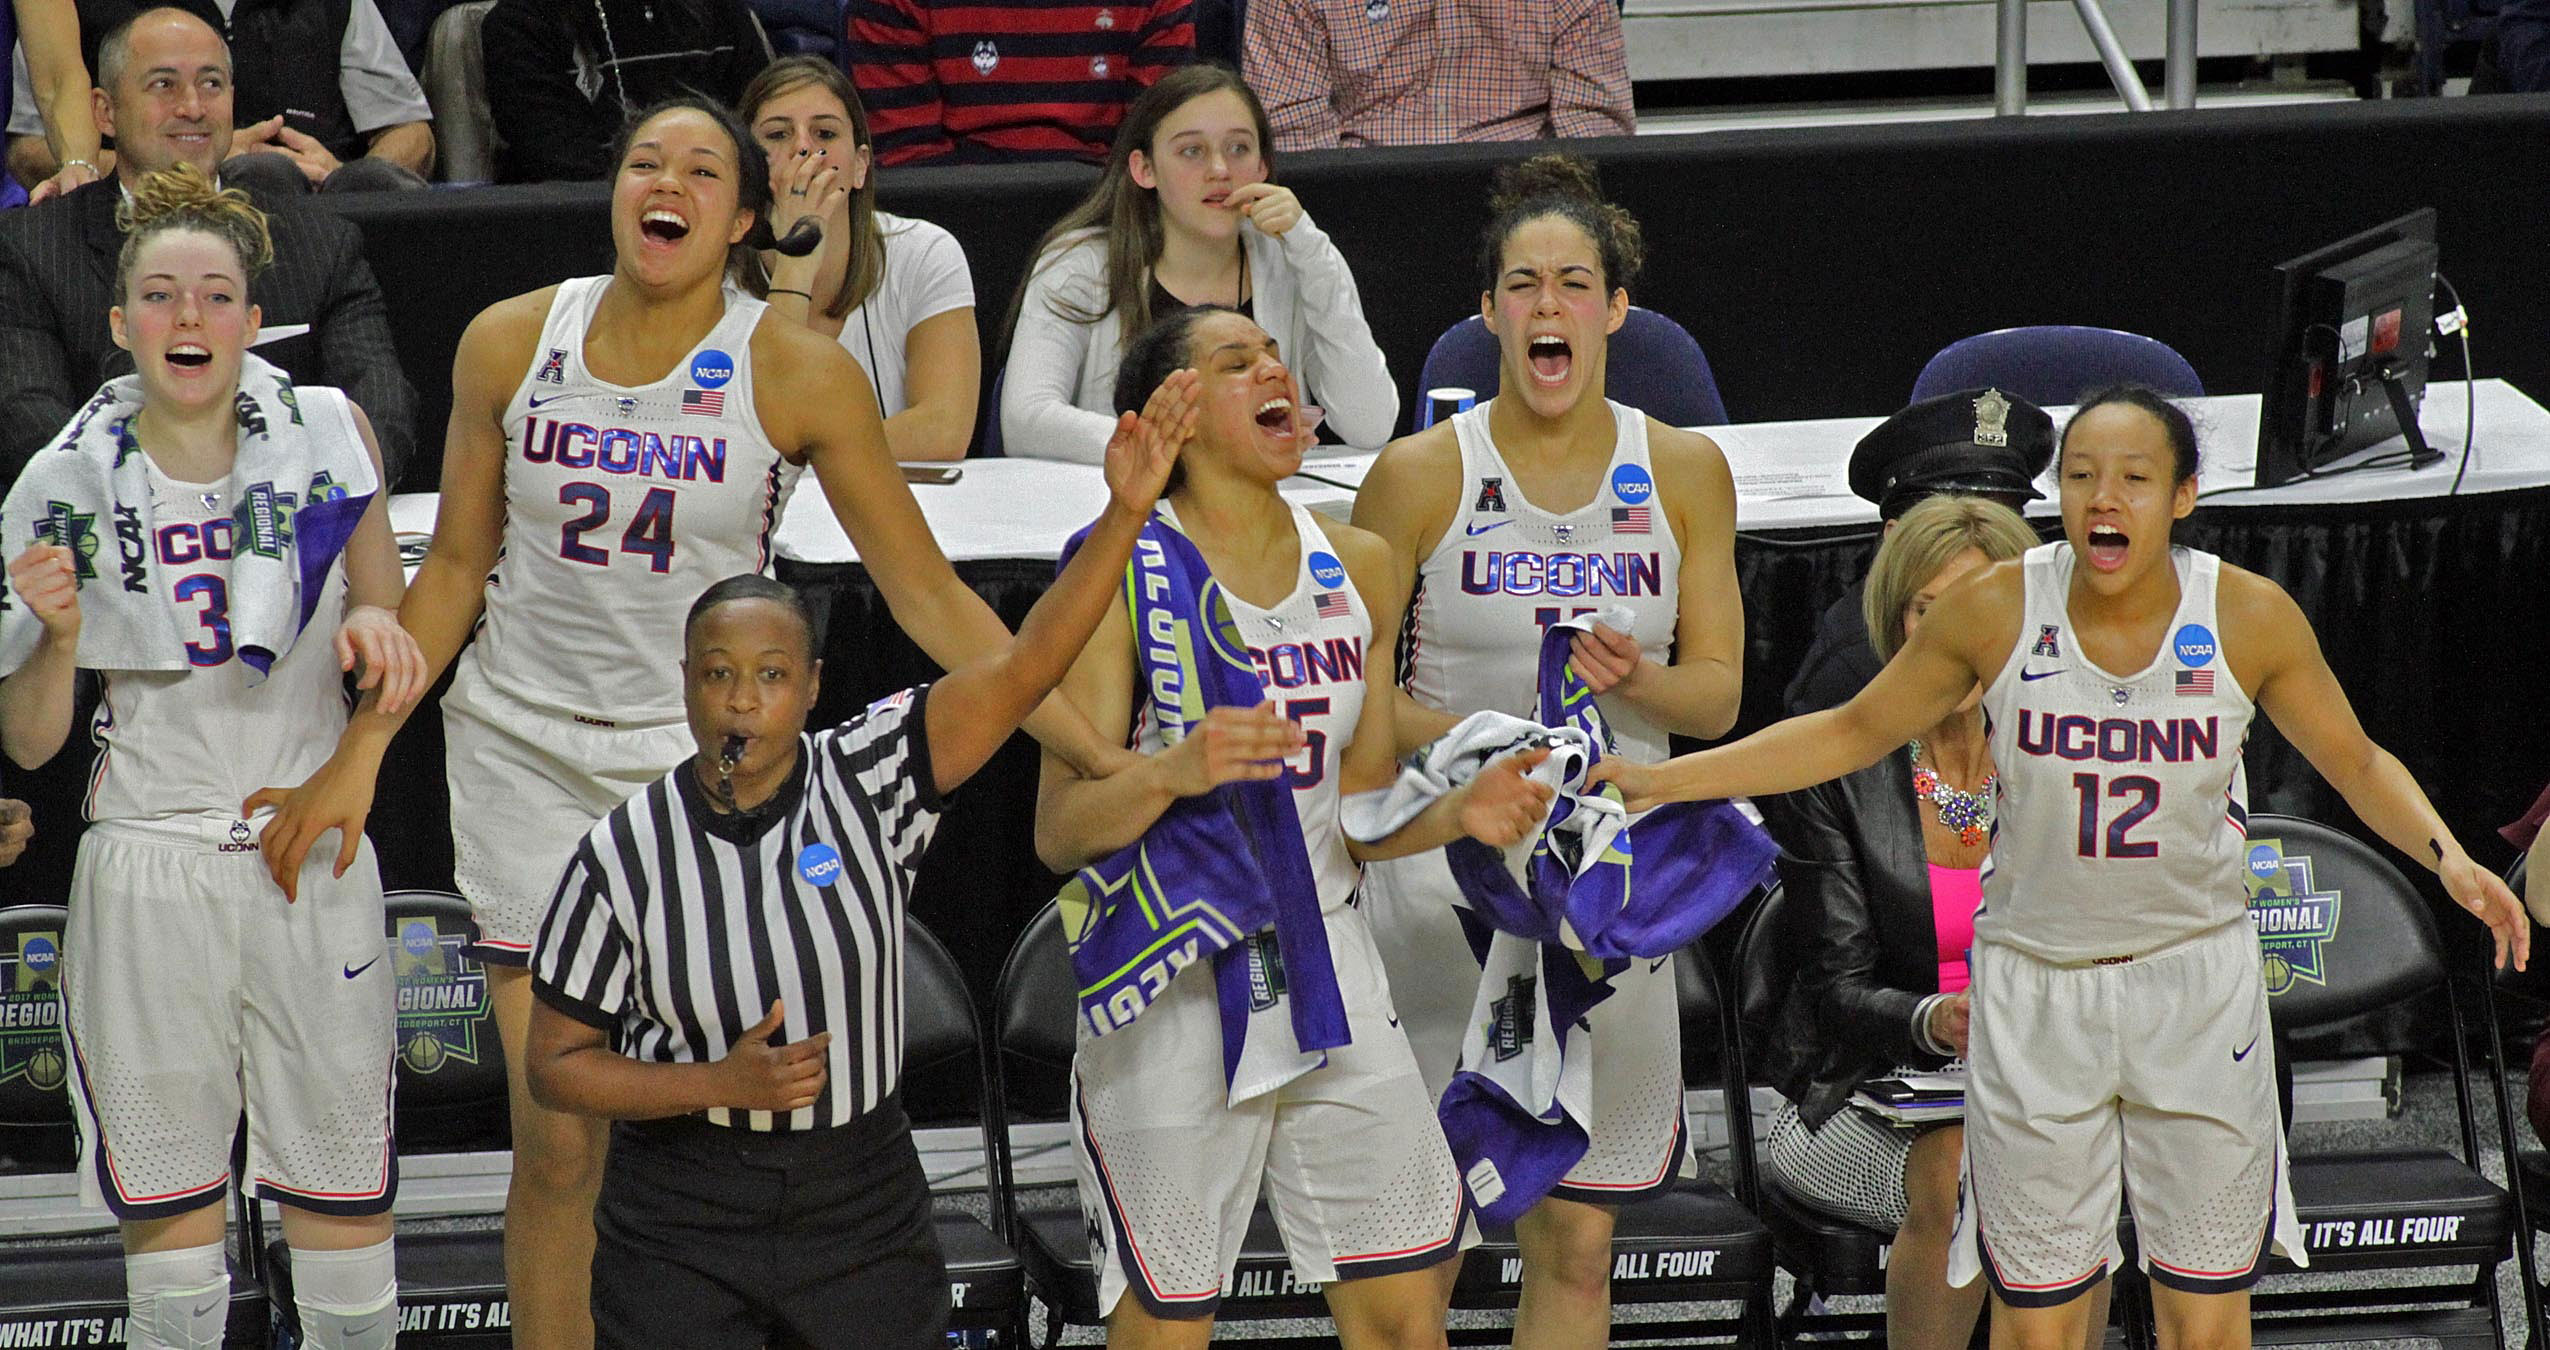 Group shot of UConn Women's Basketball team members cheering. From left:Katie Lou Samuelson ’19 (CLAS), Napheesa Collier ’19 (CLAS), Gabby Williams ’18 (CLAS), Kia Nurse ’18 (CLAS), and Saniya Chong ’17 (CLAS) cheer on teammates (not pictured) Molly Bent ’20 (ACES), Natalie Butler, Crystal Dangerfield ’20 (ACES), Kyla Irwin ’20 (CLAS), and Tierney Lawlor ’17 (CAHNR) during their Elite Eight defeat of Oregon.